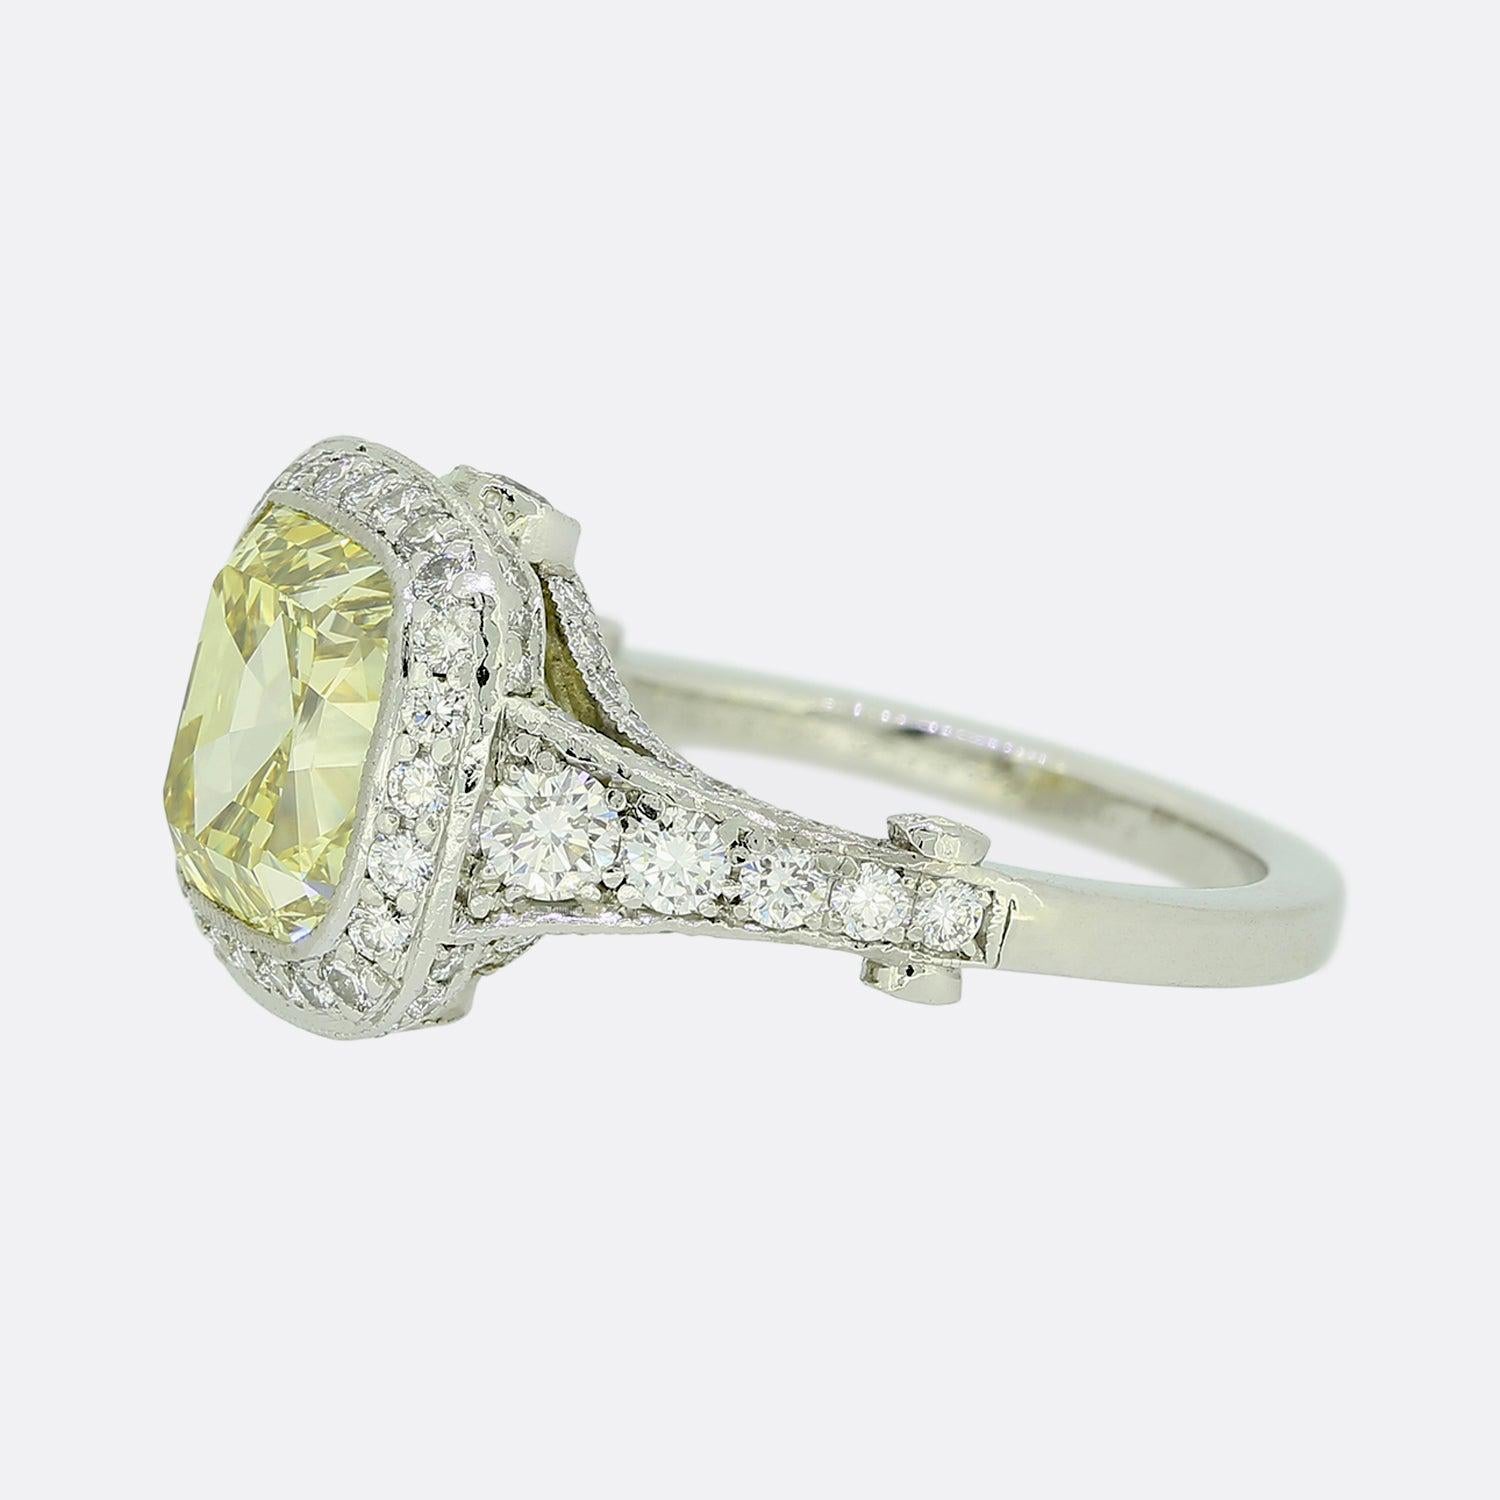 Here we have a shimmering diamond engagement ring from the world renowned jewellery designer, Tiffany & Co. The ring presents a 4.0 carat cushion-cut centre stone that is fancy intense yellow and VS1 clarity. It is surrounded by a single halo of